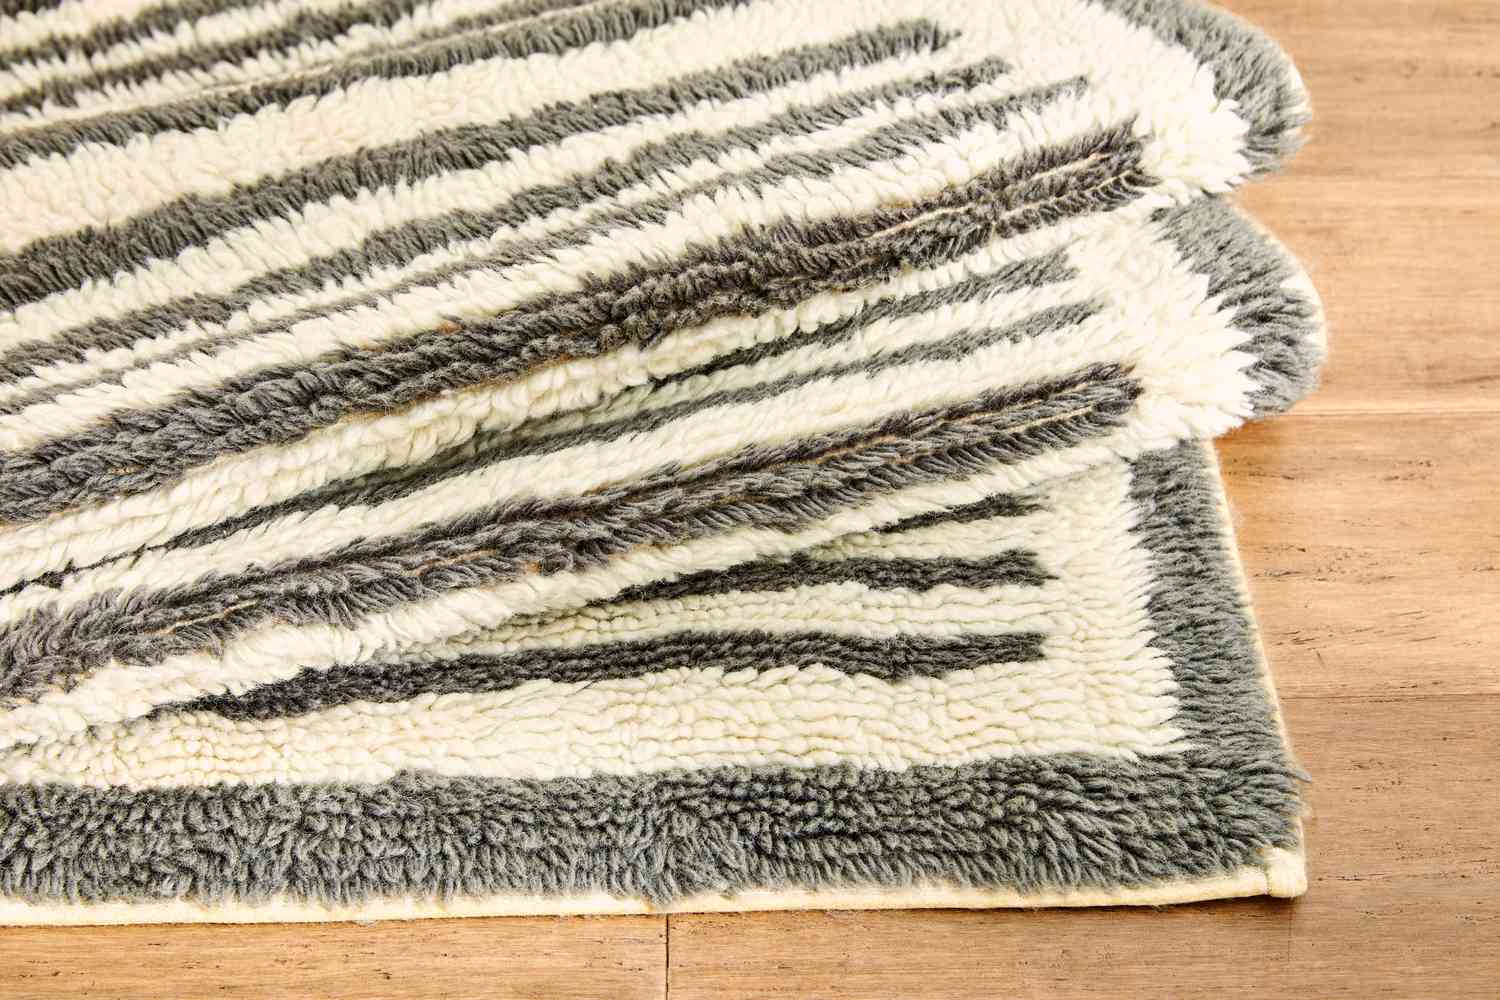 The AllModern Machine Washable Hand-Woven Wool Ivory/Charcoal Area Rug folded up